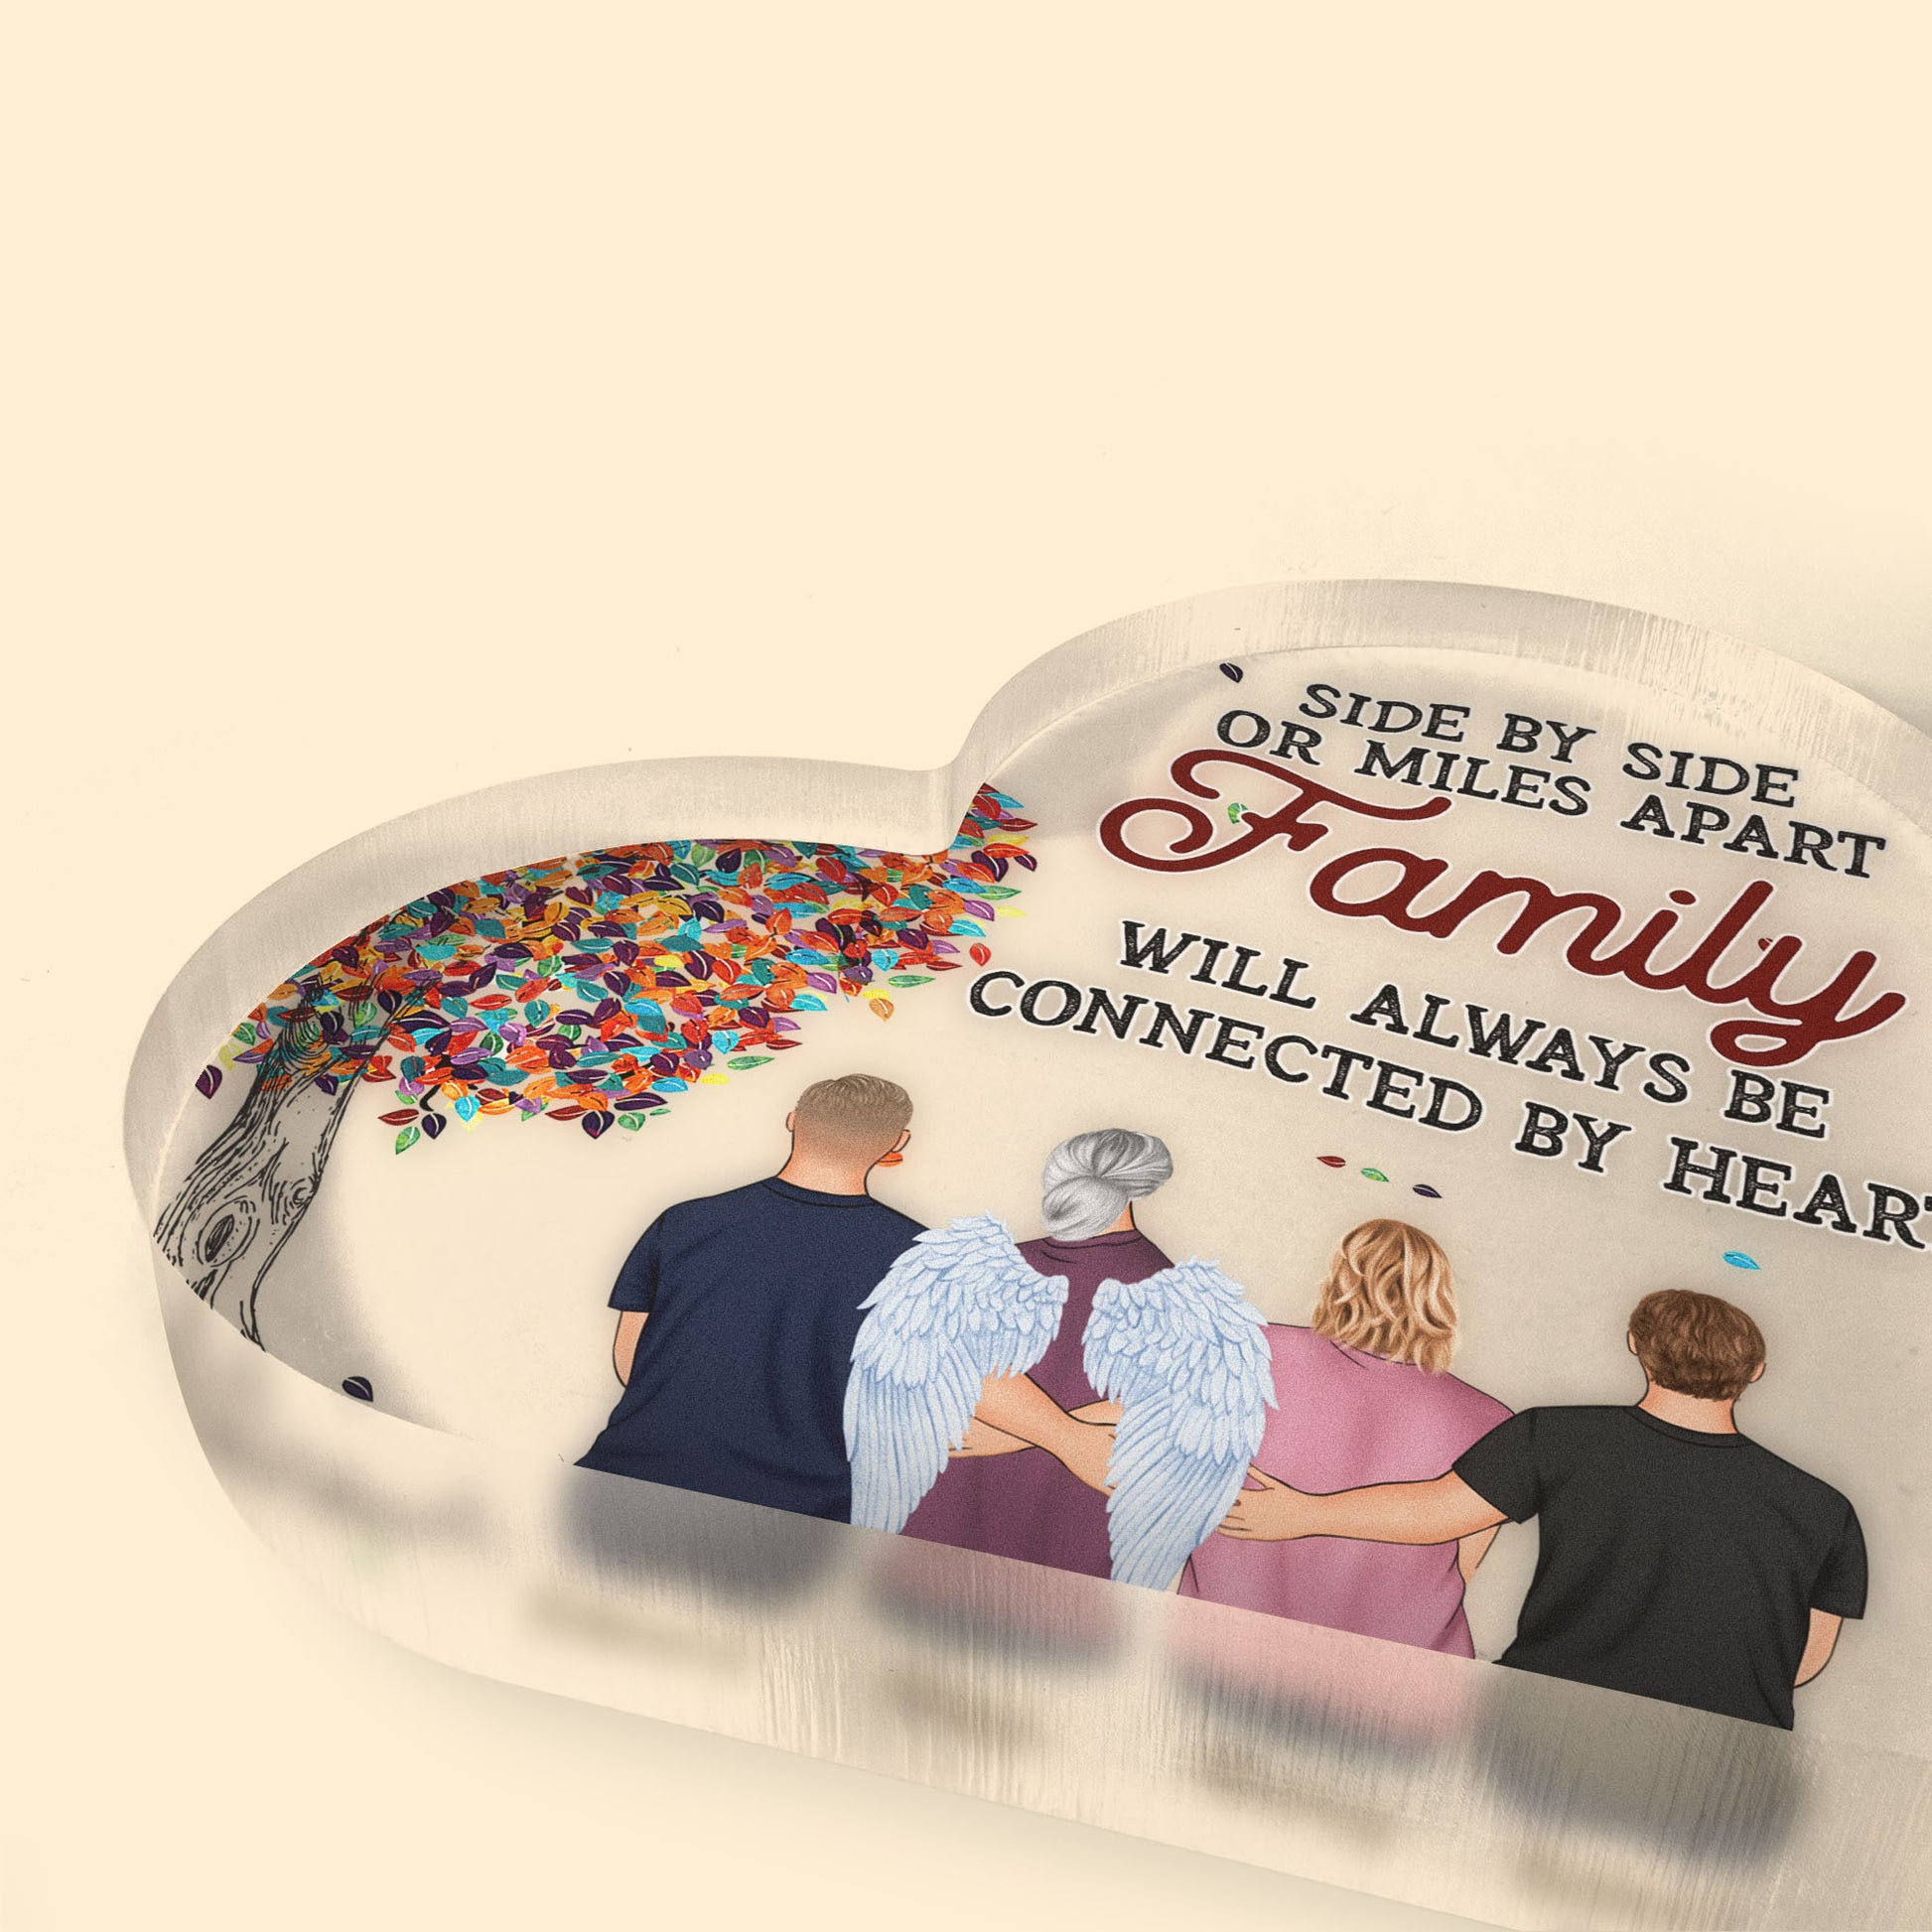 Brothers & Sisters Are Always Connected By Heart - Personalized Heart-Shaped Acrylic Plaque - Gift For Brothers, Sisters, Siblings, Family